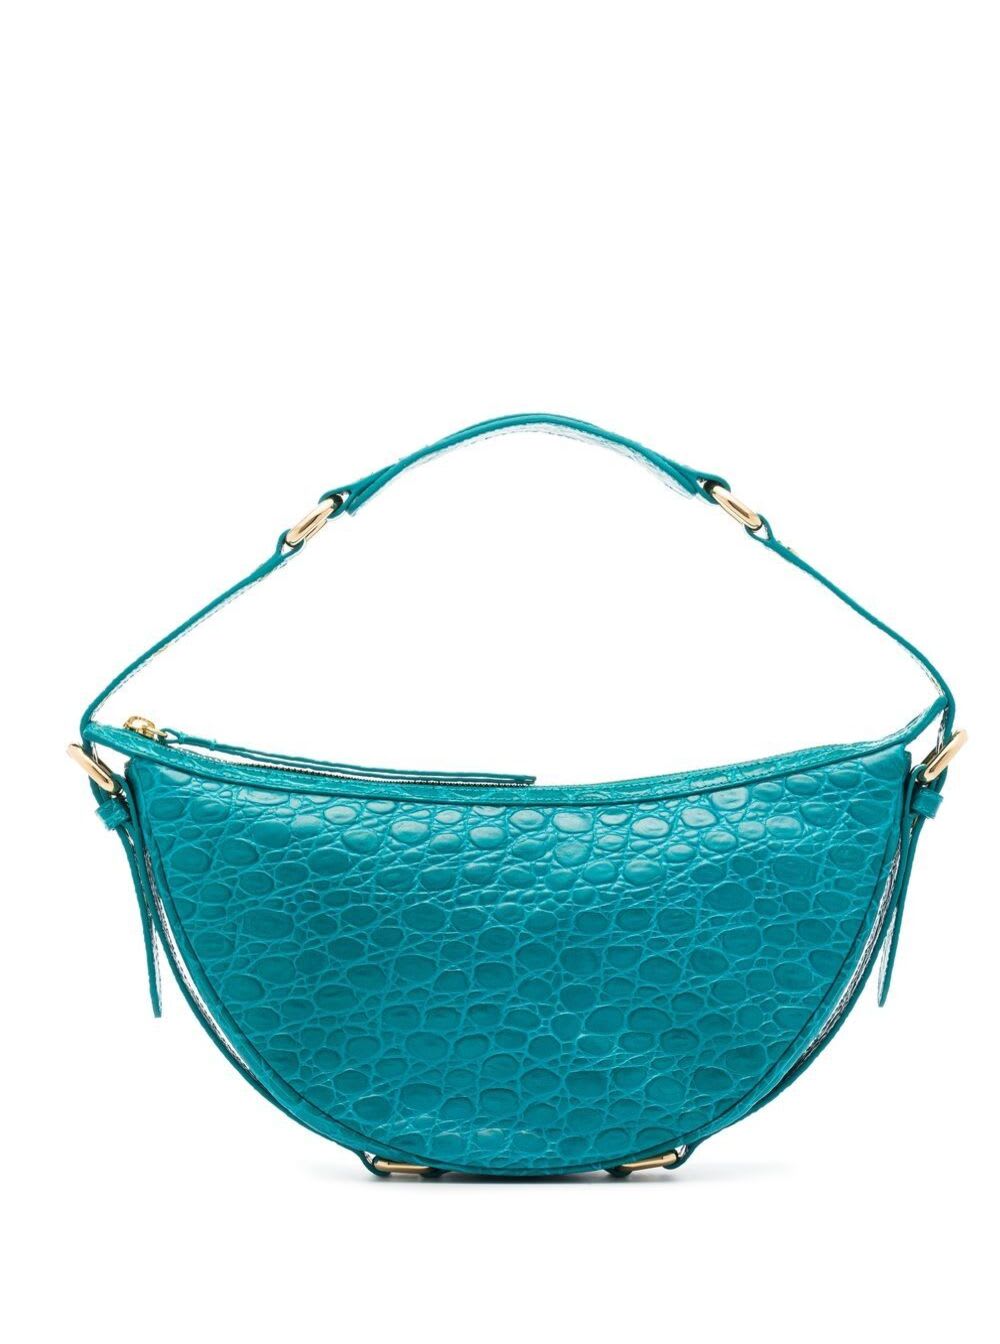 BY FAR Light Blue Crocodile Printed Leather Handbag With Gold-colored Details Woman